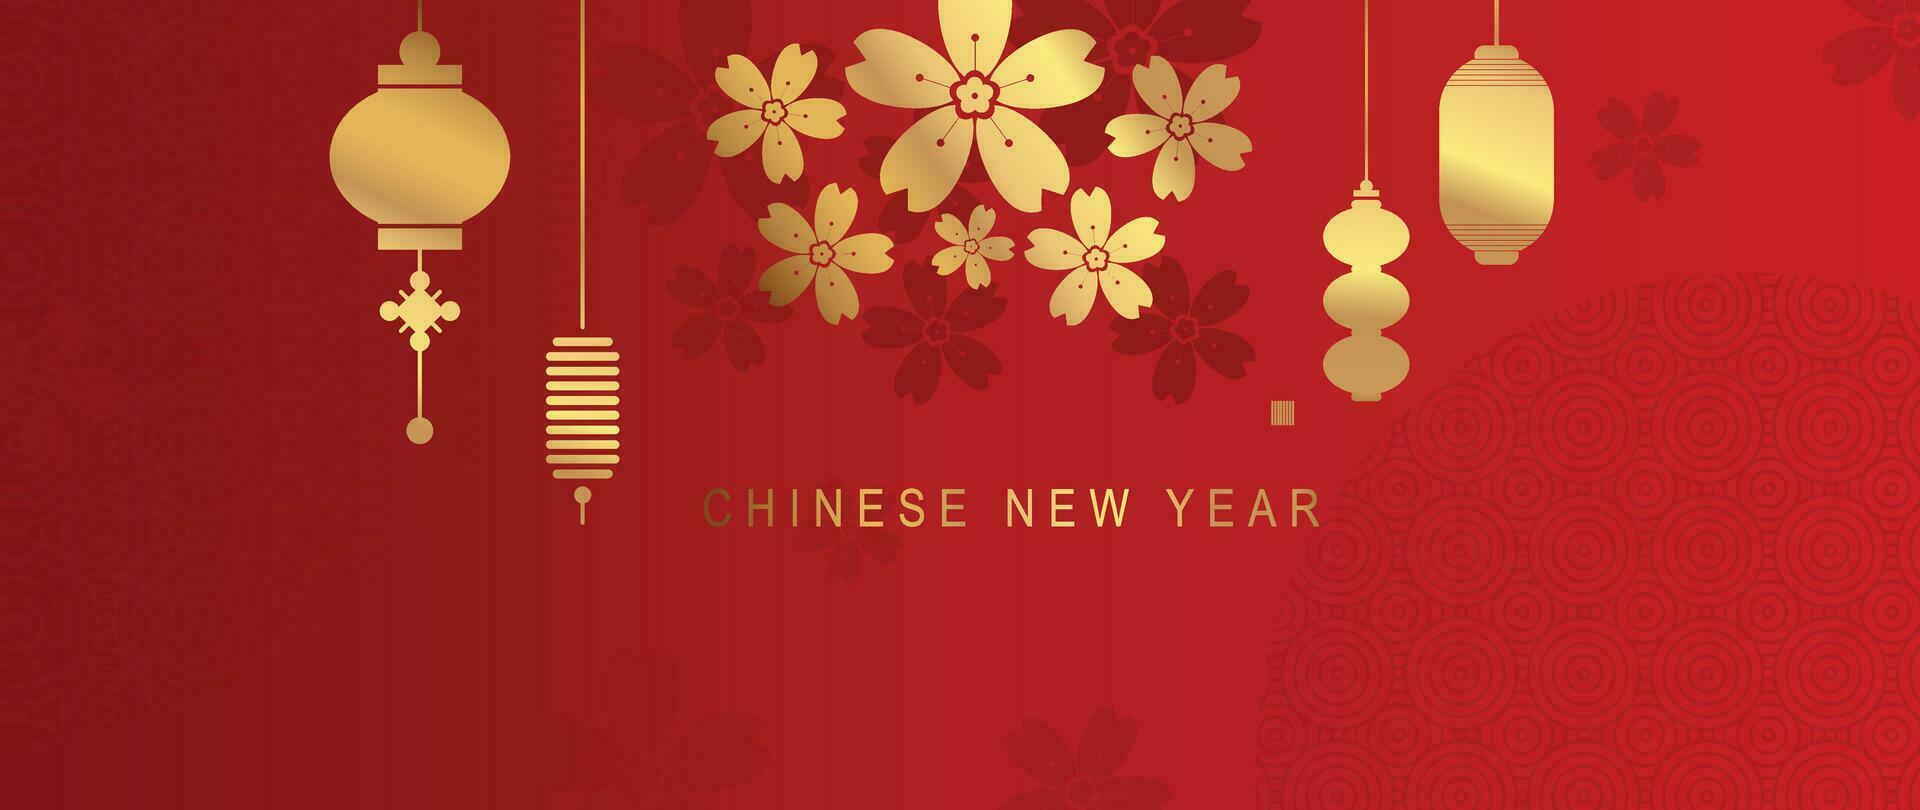 Happy Chinese new year background vector. Year of the dragon design wallpaper with lantern hanging, flower, chinese pattern. Modern luxury oriental illustration for cover, banner, website, decor. vector